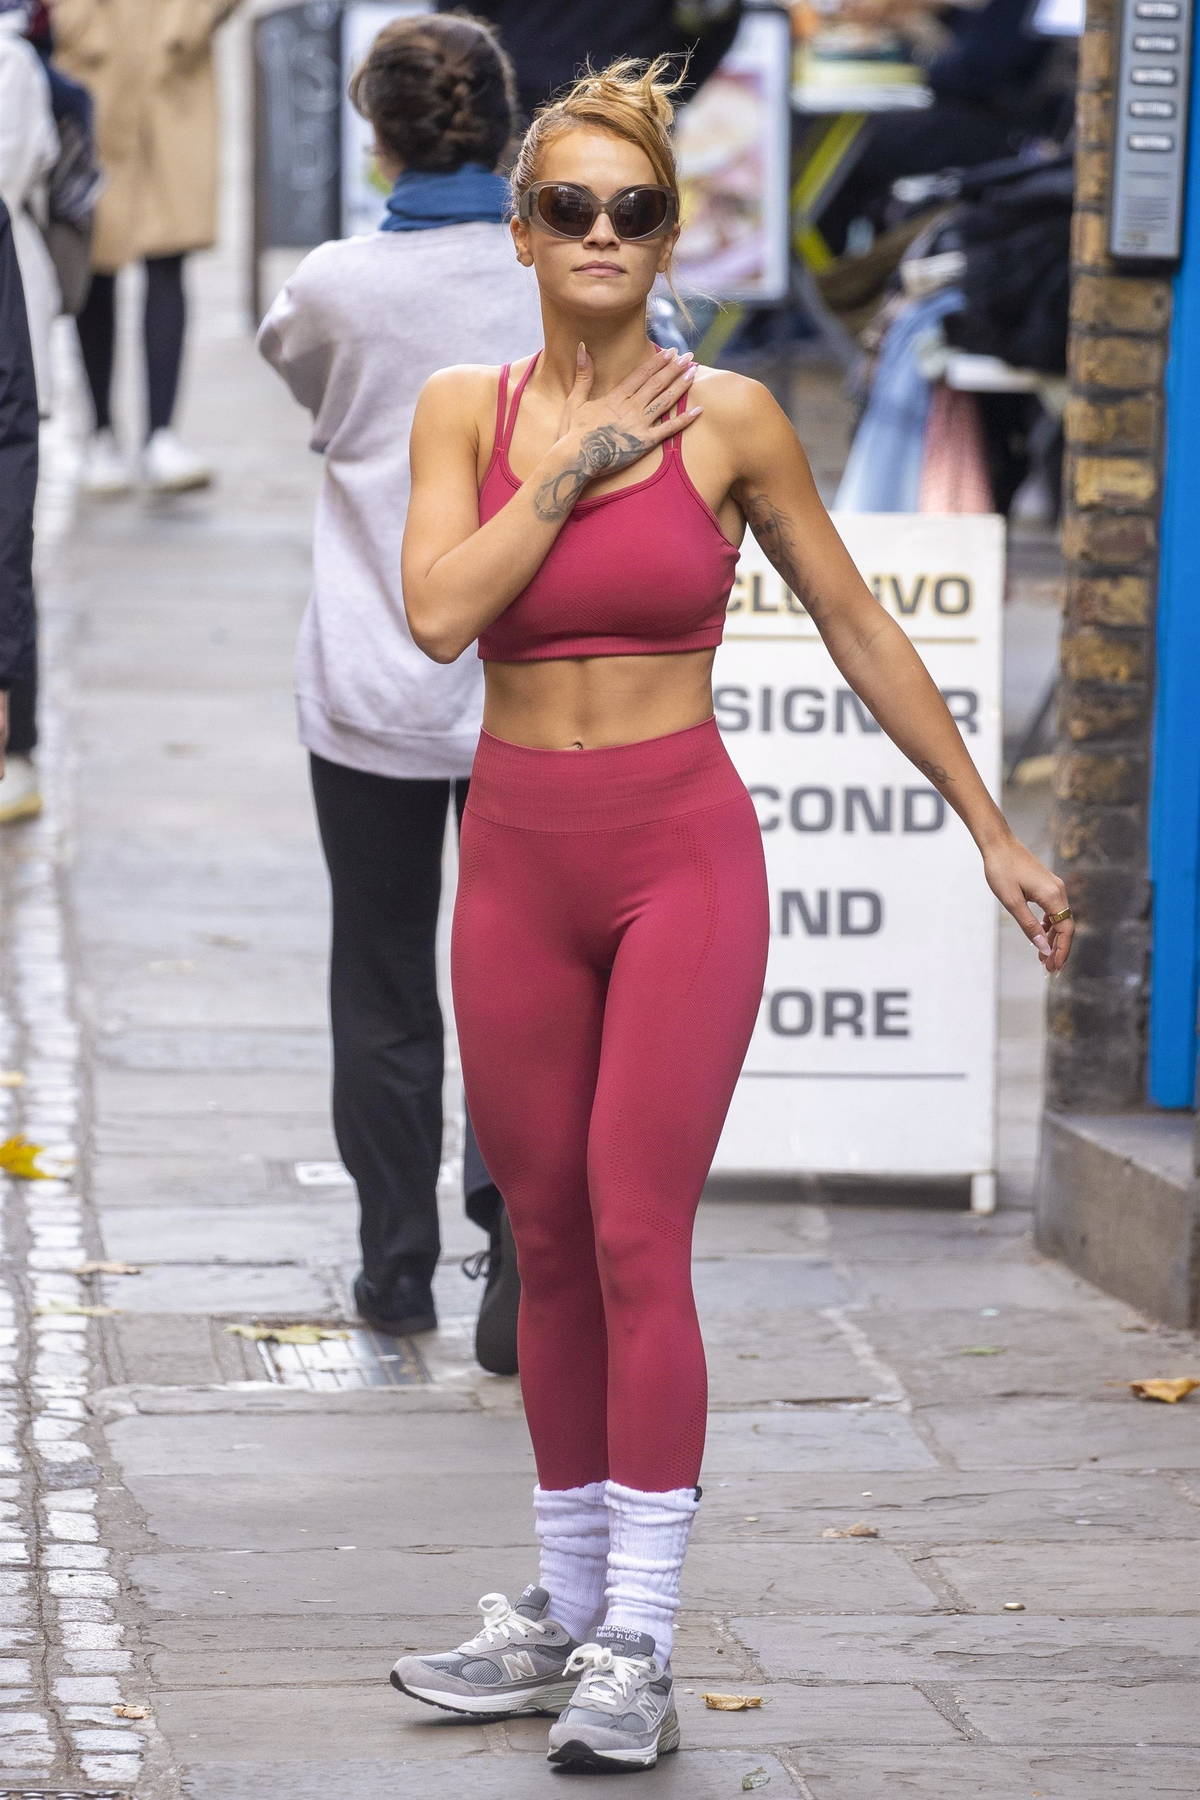 Rita Ora shows off her taut physique in a pink sports bra and leggings as  she leaves a Pilates class in London, UK